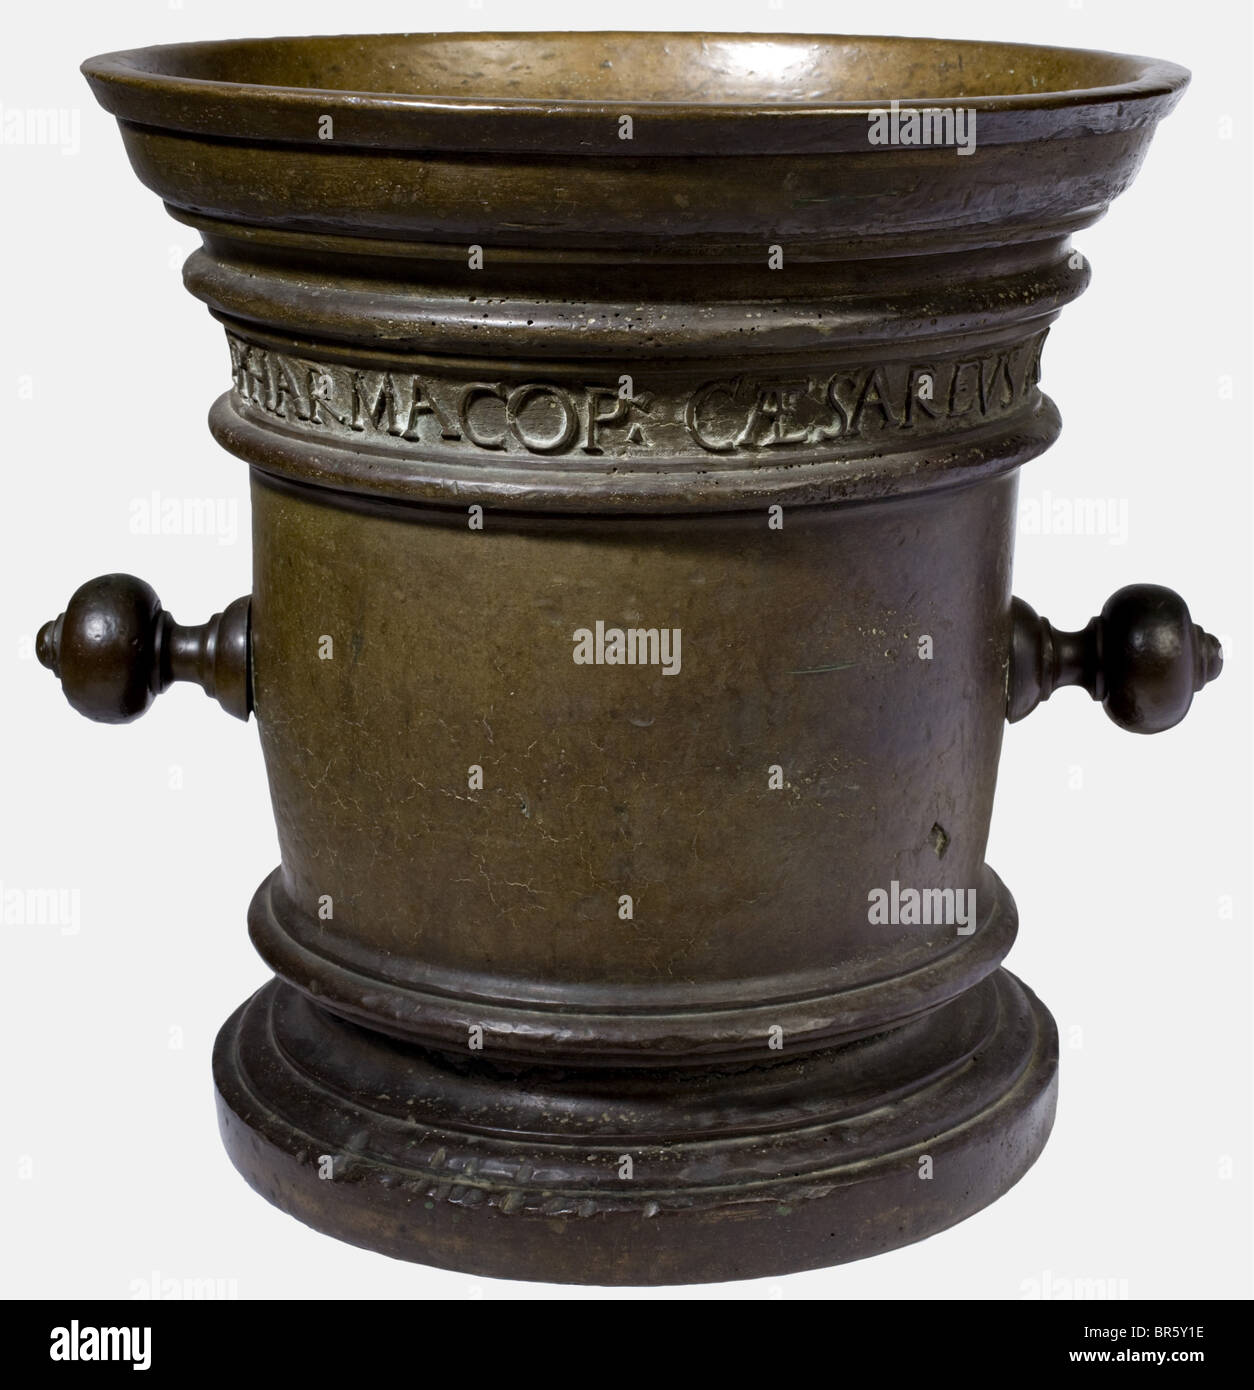 A large apothecary mortar, Regensburg, dated 1607 Bronze with beautiful age patina. Cylindrical body with offset base and widely flaring lip. On the sides two sturdy ball handles. Underneath the lip a continuous inscription band 'HERIC ERDELIO RATISBONA PHARMACOP CAESAREUS AO. 1607' (Erich Ertl?, court pharmacist to the Kaiser in Regensburg in 1607). Handles slightly loose, surrounding horizontal crack above the base plate. Height 38 cm, 37.5 cm in diameter. Heavy main mortar of a pharmacy in Regensburg, purveyor to the court of Rudolf II while he resided there, Stock Photo